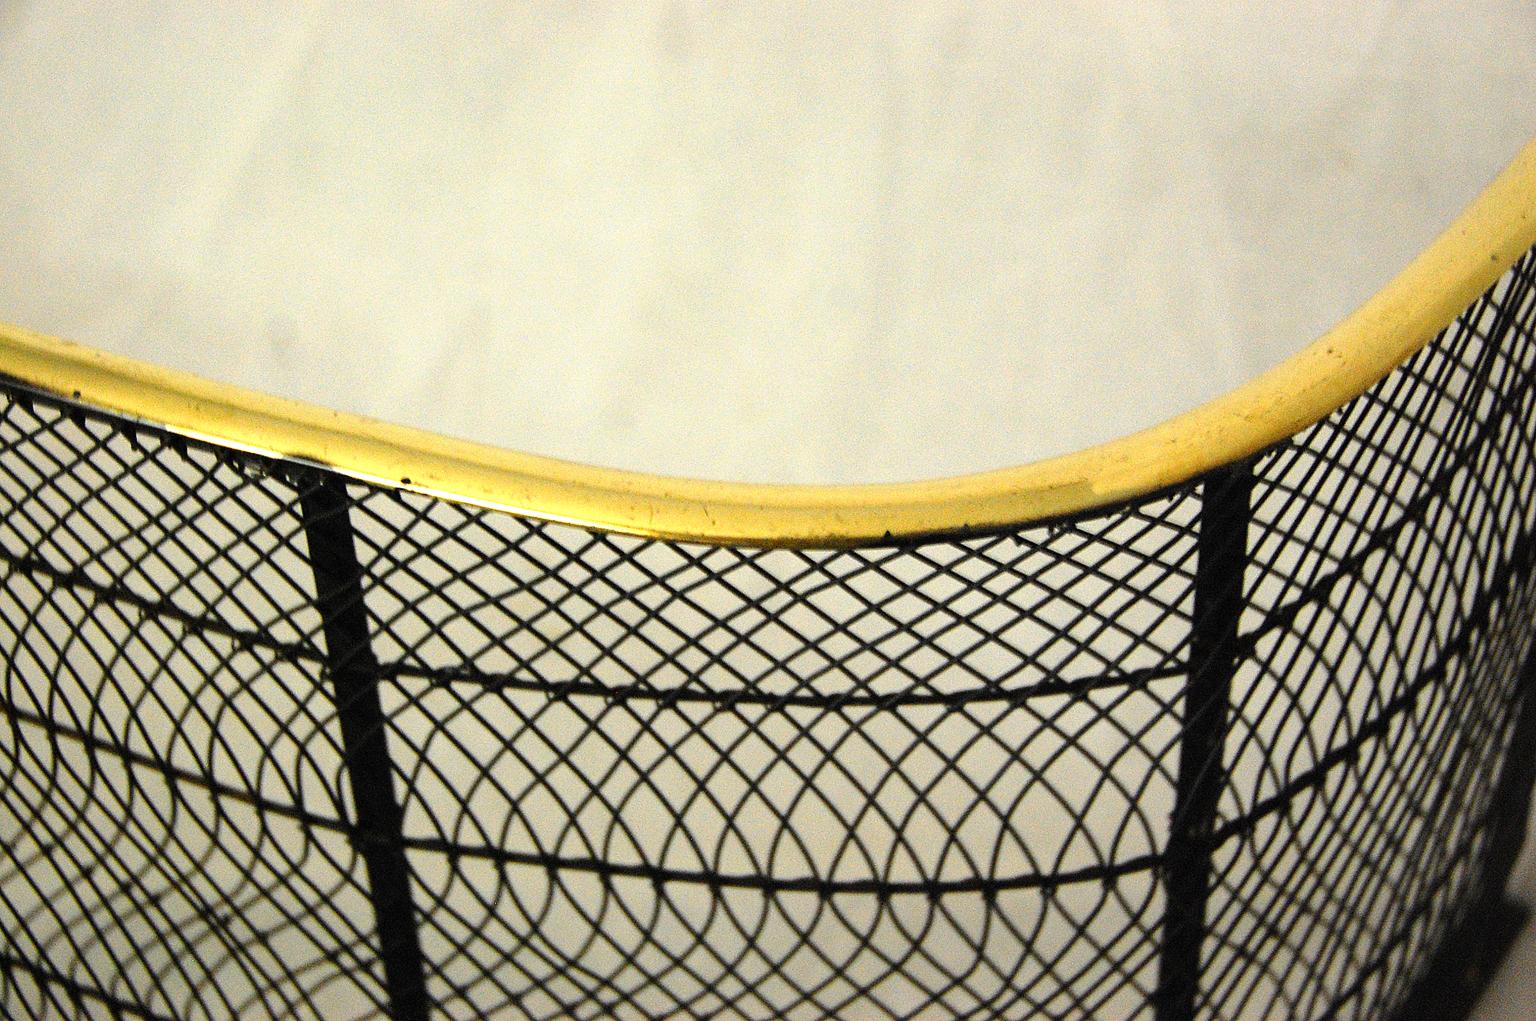 English Regency period brass and wire bowfront fender; 37 inches long, circa 1825.